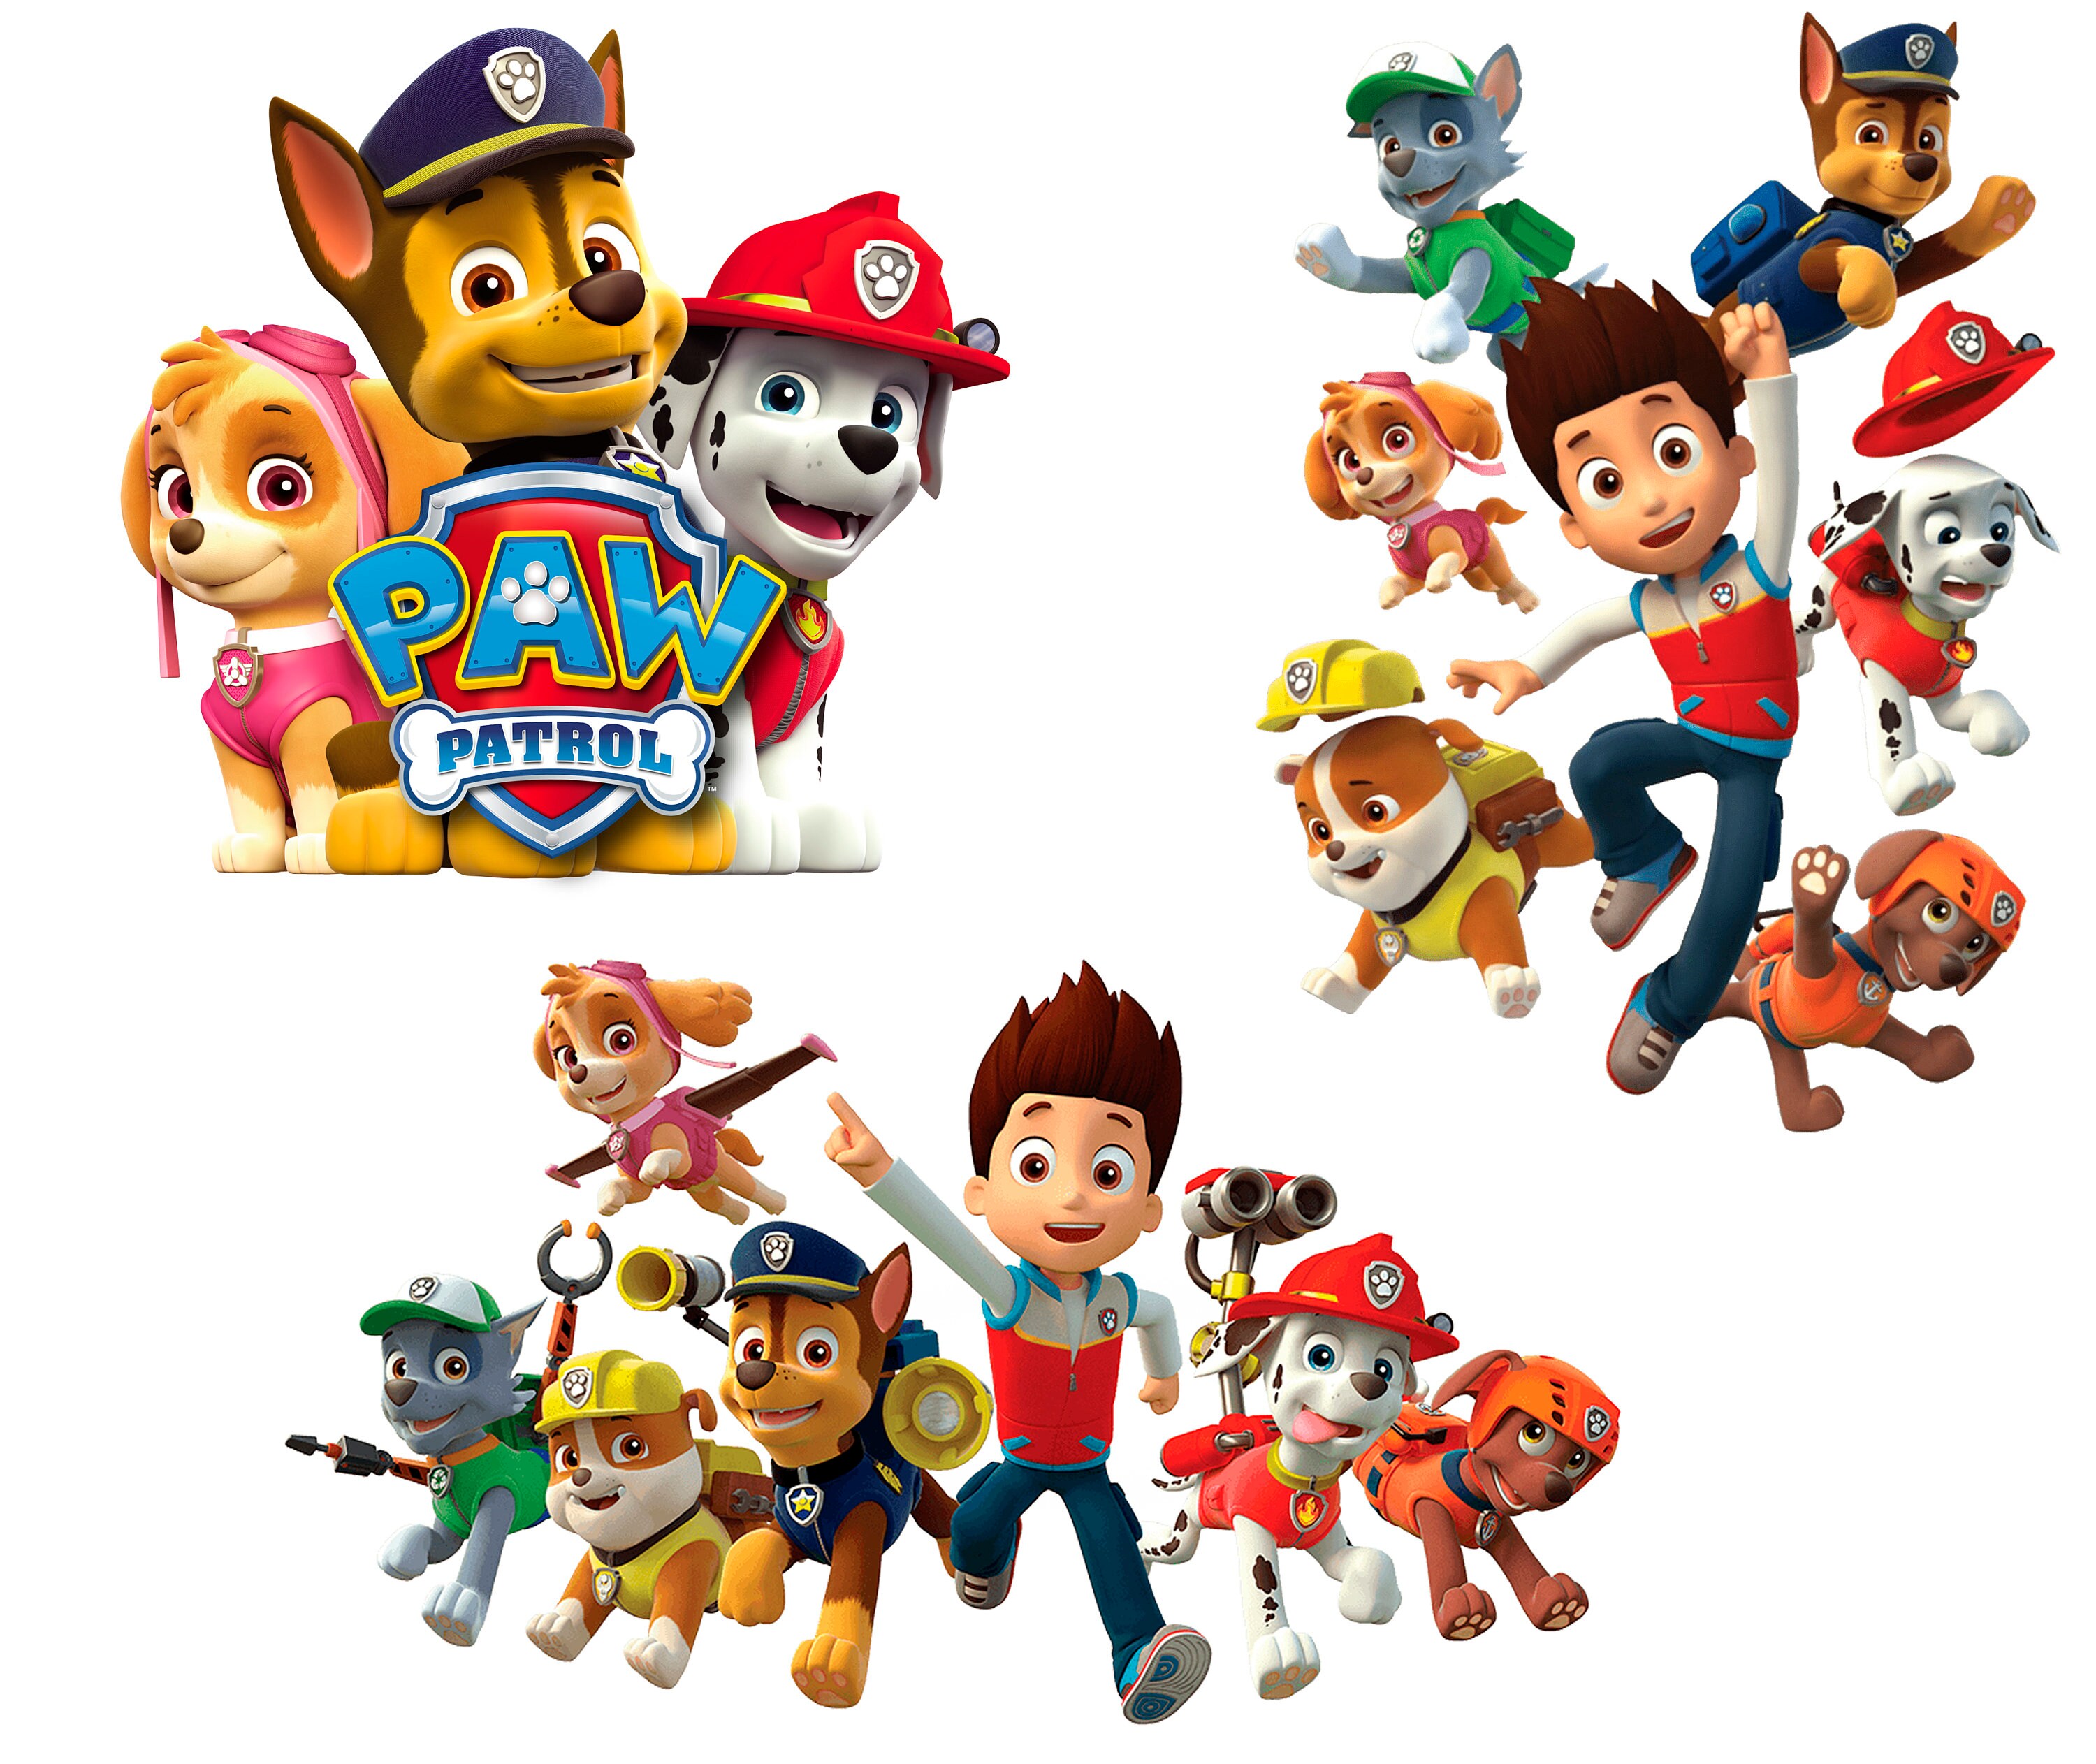 Tilskyndelse Stolthed levering Paw Patrol Clipart Paw Patrol Cartoon PNG Paw Patrol | Etsy